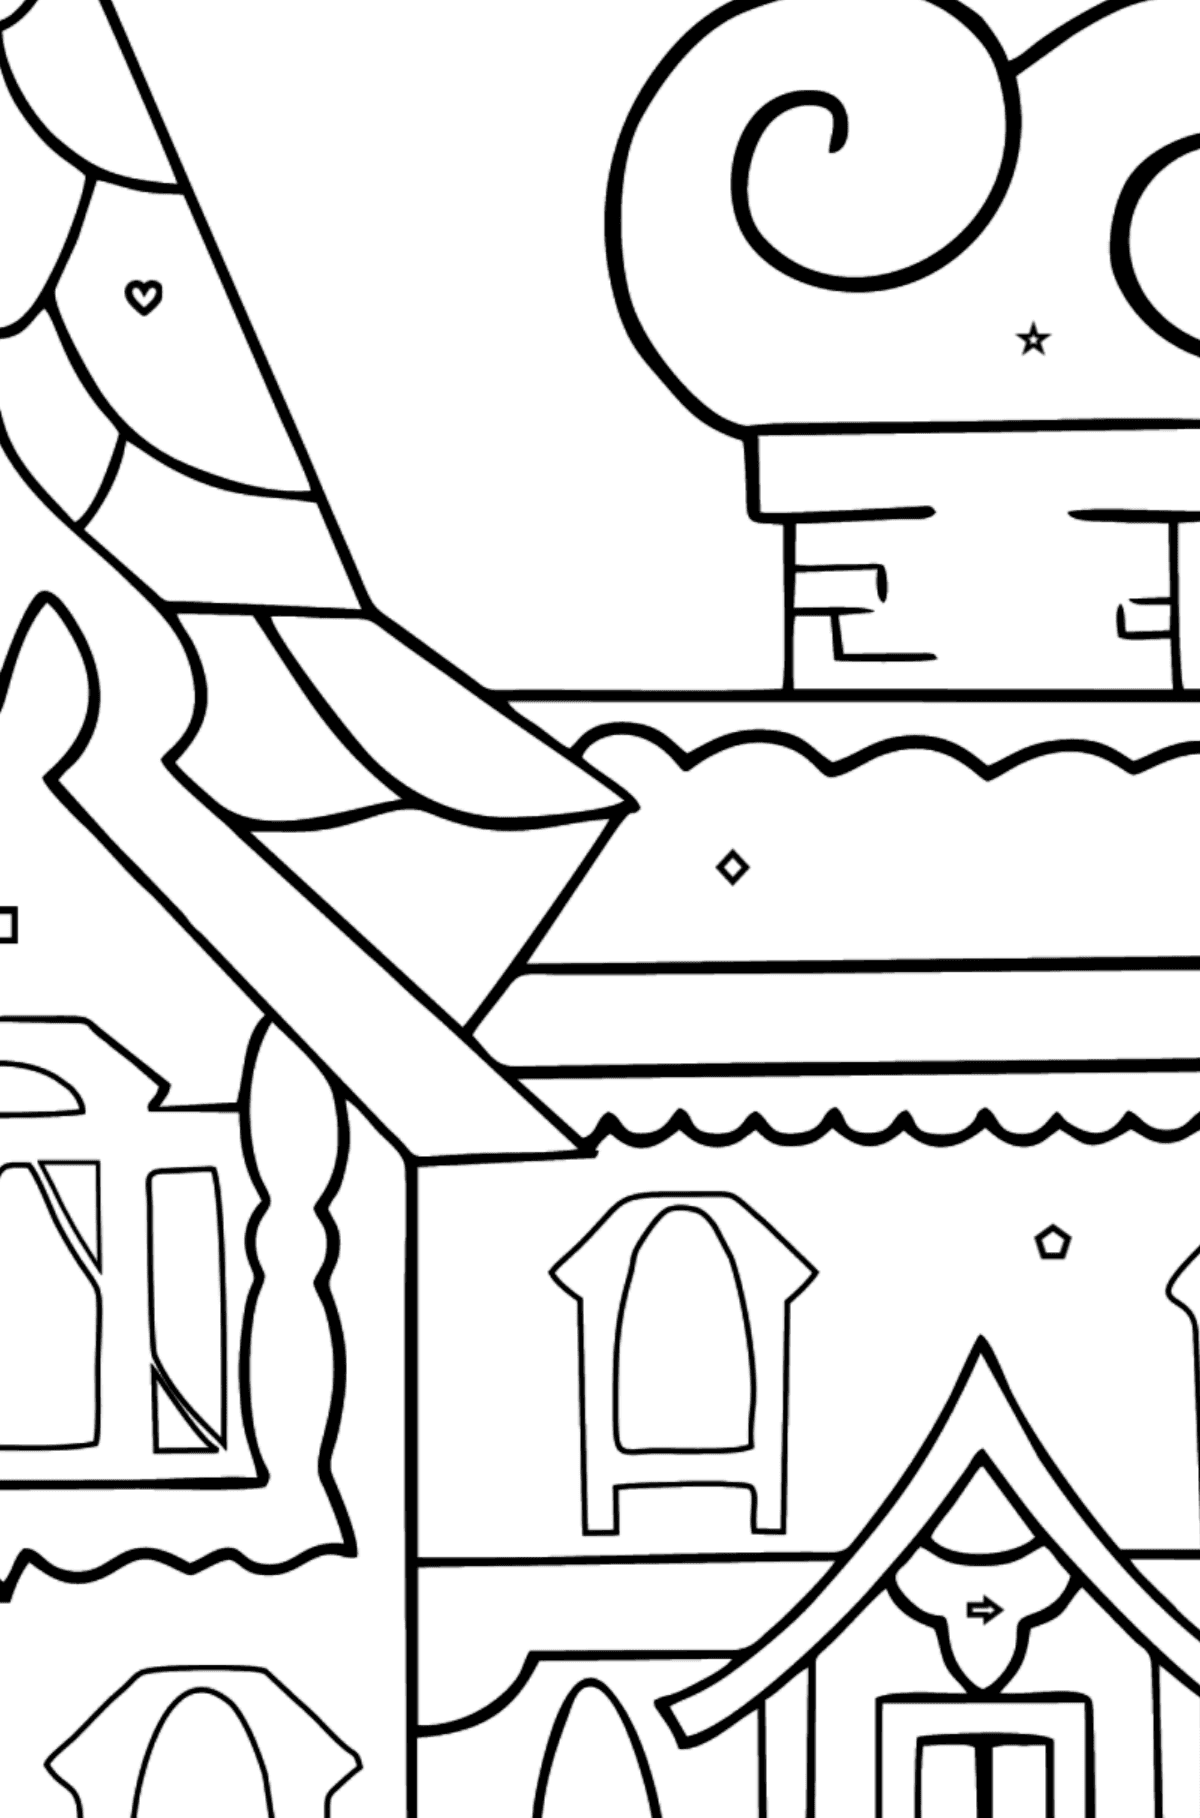 Simple Coloring Page - A House - A Kingdom of Storytellers - Coloring by Geometric Shapes for Kids